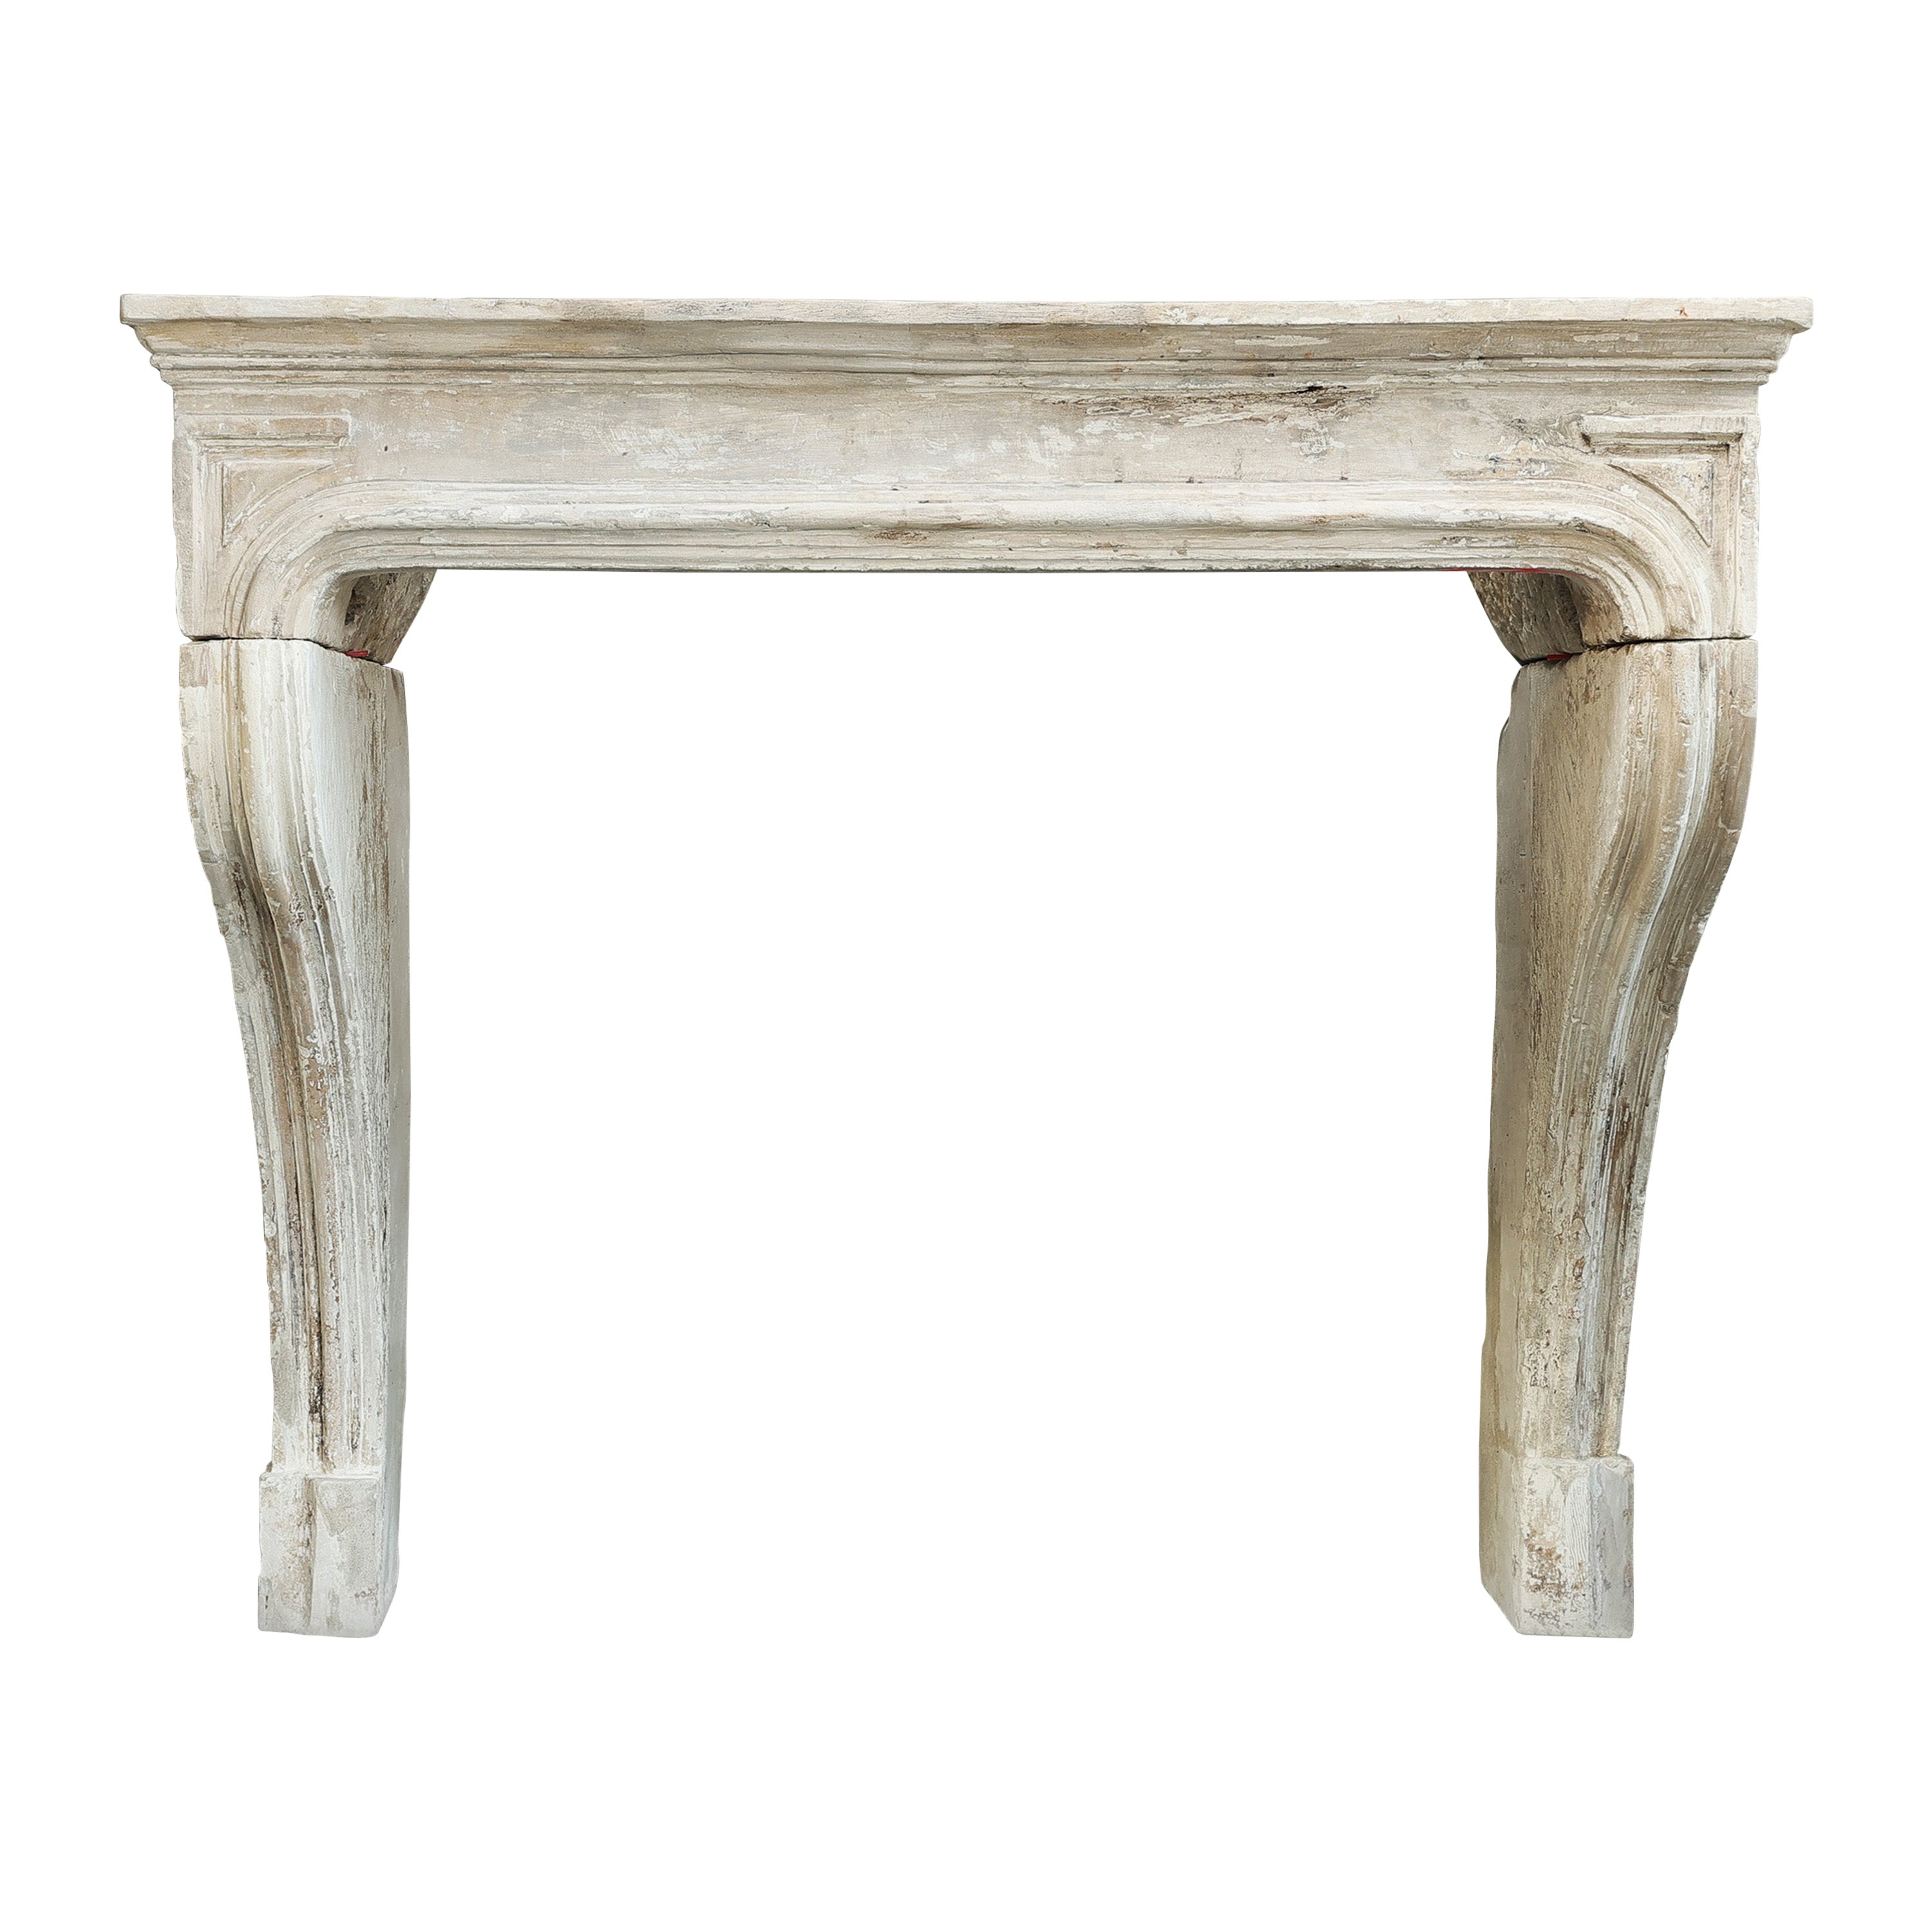 Antique Fireplace Mantel  French Limestone  19th Century